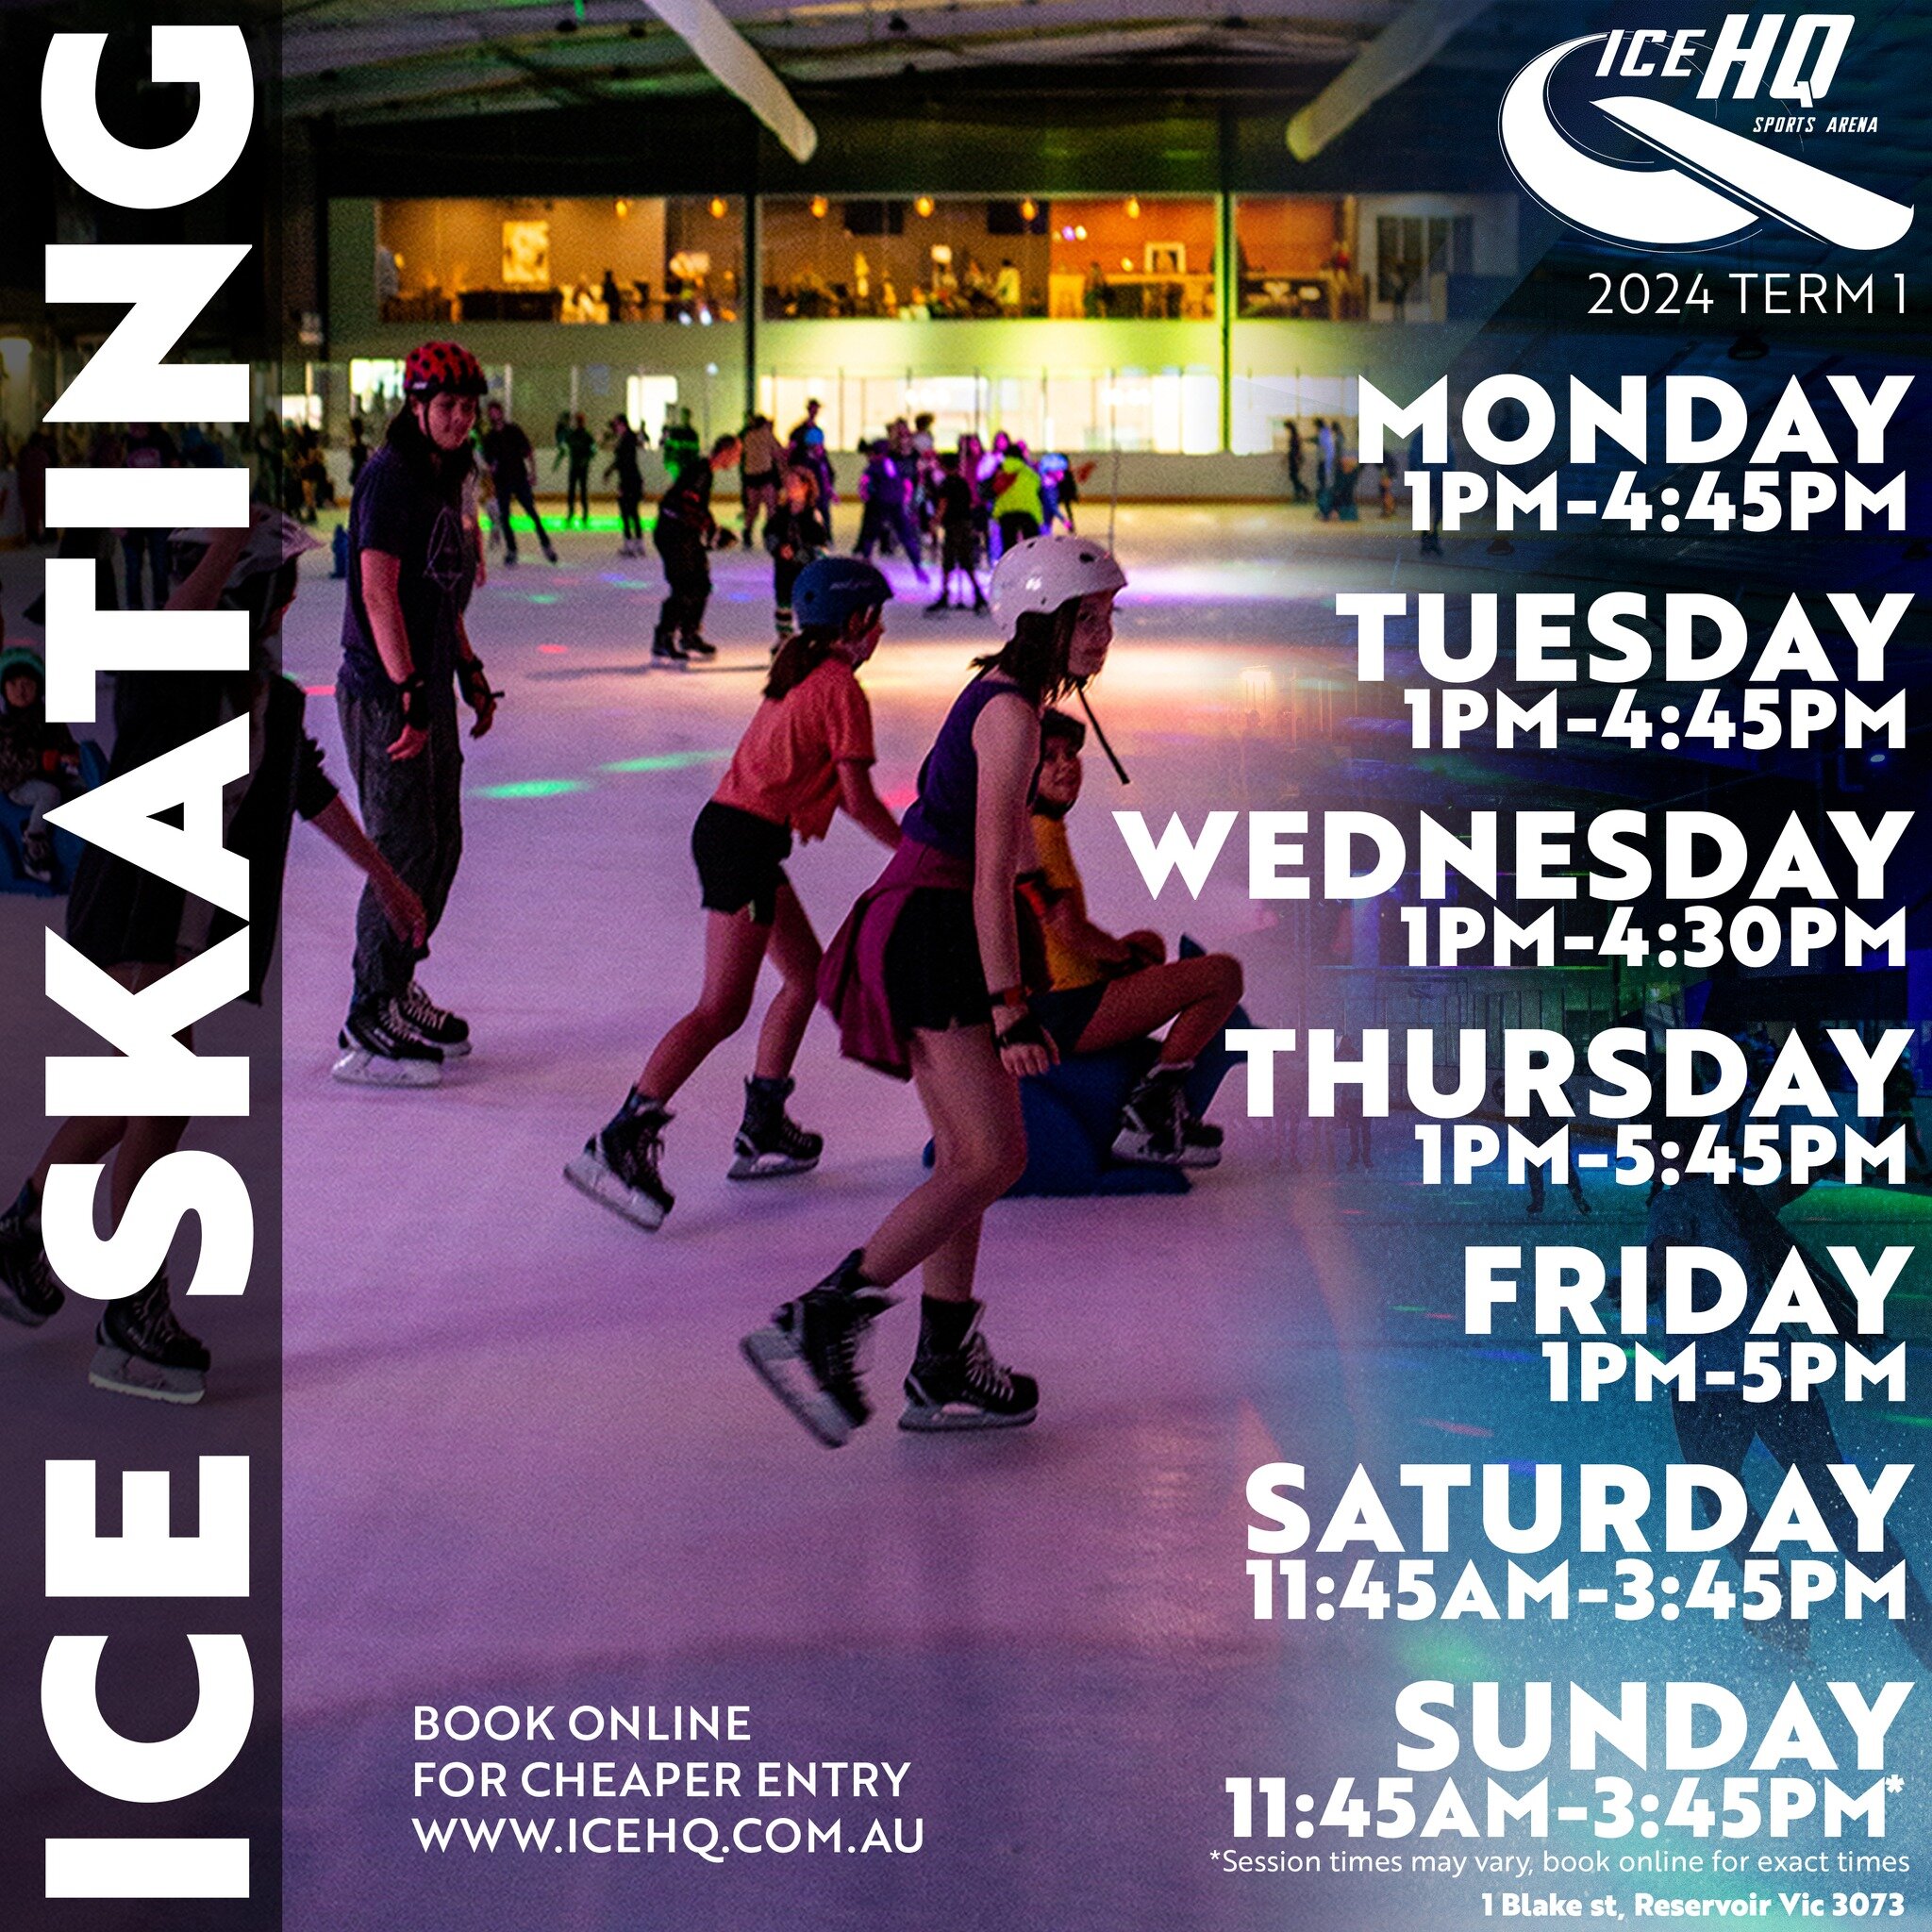 We're ice skating every day at iceHQ! ⛸️
Glide into the coolest place in town &ndash; iceHQ! Promising an unforgettable ice skating experience for all ages ⛸️✨❄️ 
Whether you're a seasoned skater or a beginner, iceHQ has something for everyone.

⛸️ F